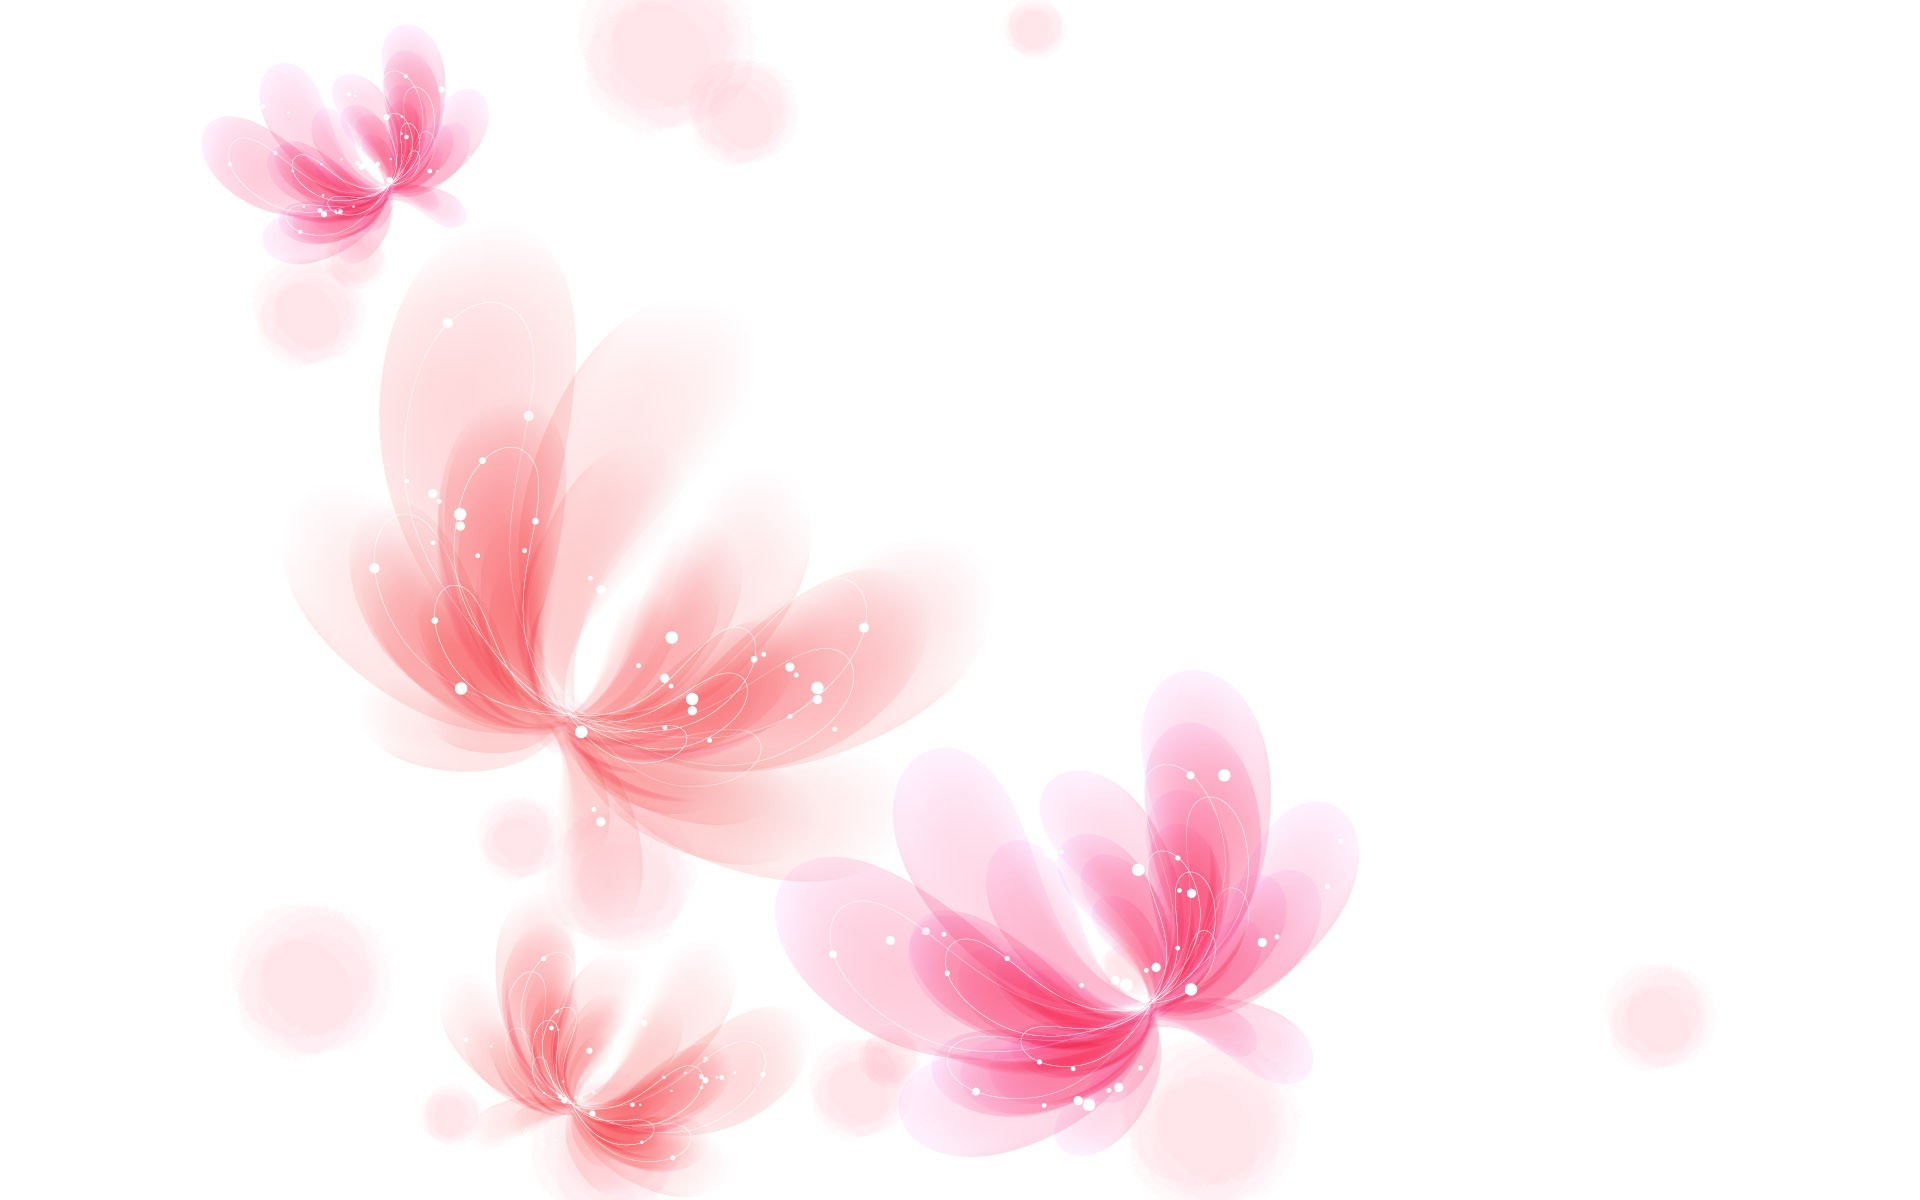 1920x1200 Black White And Pink Backgrounds 26 Free Hd Wallpaper